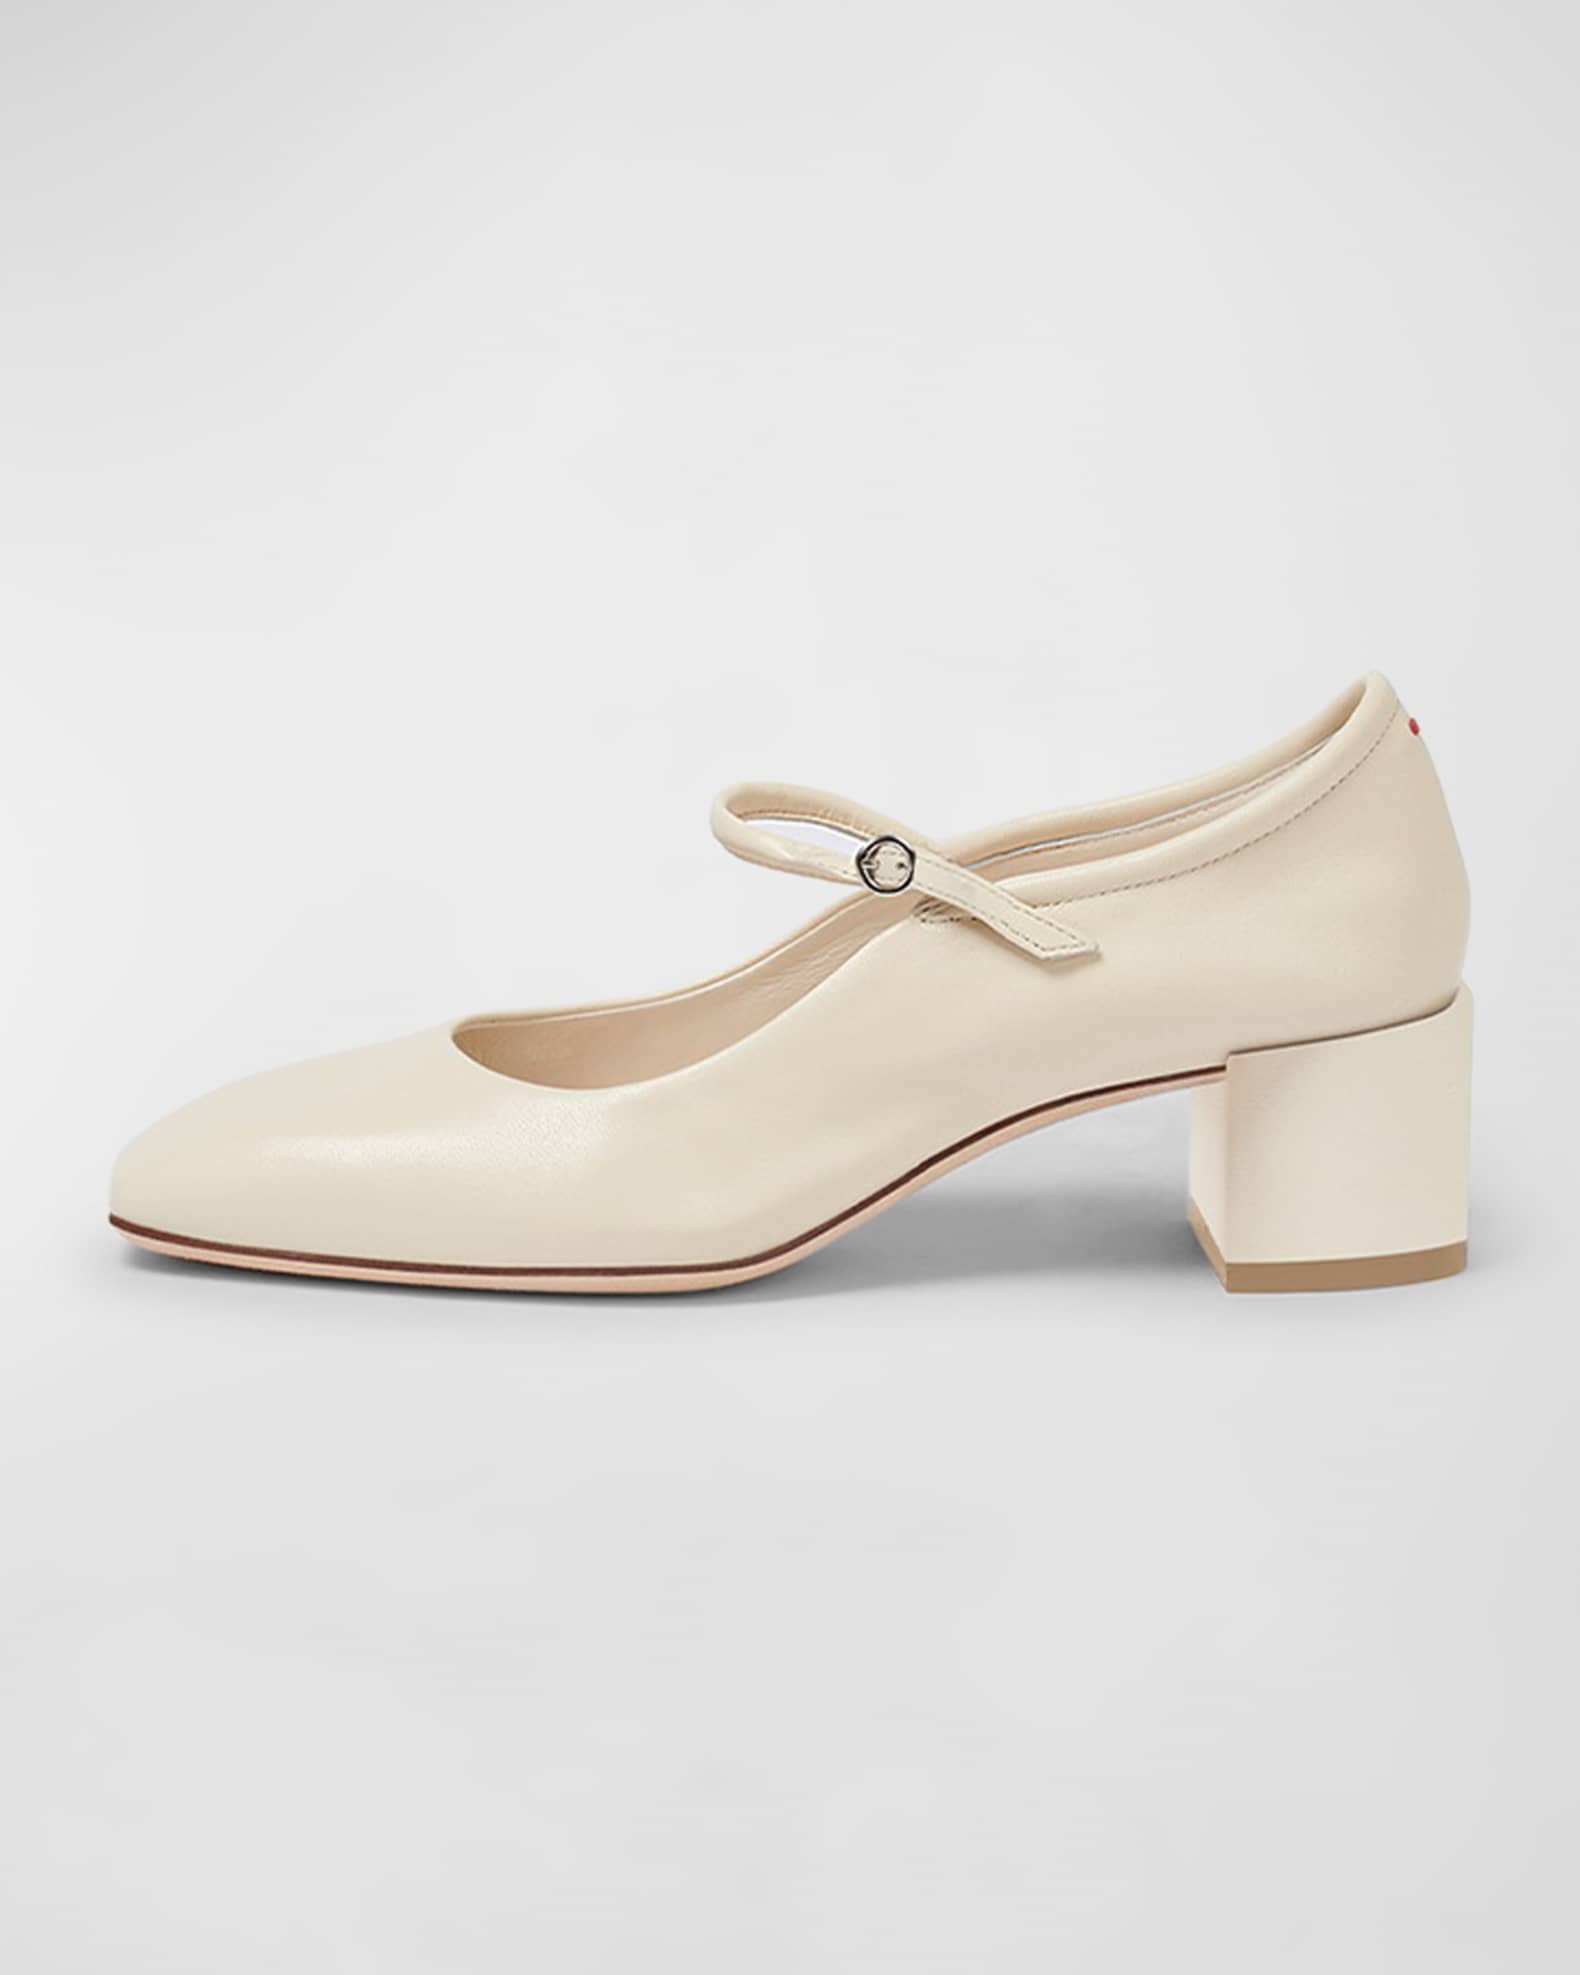 Aeyde Aline Square-Toe Mary Jane Pumps | Neiman Marcus